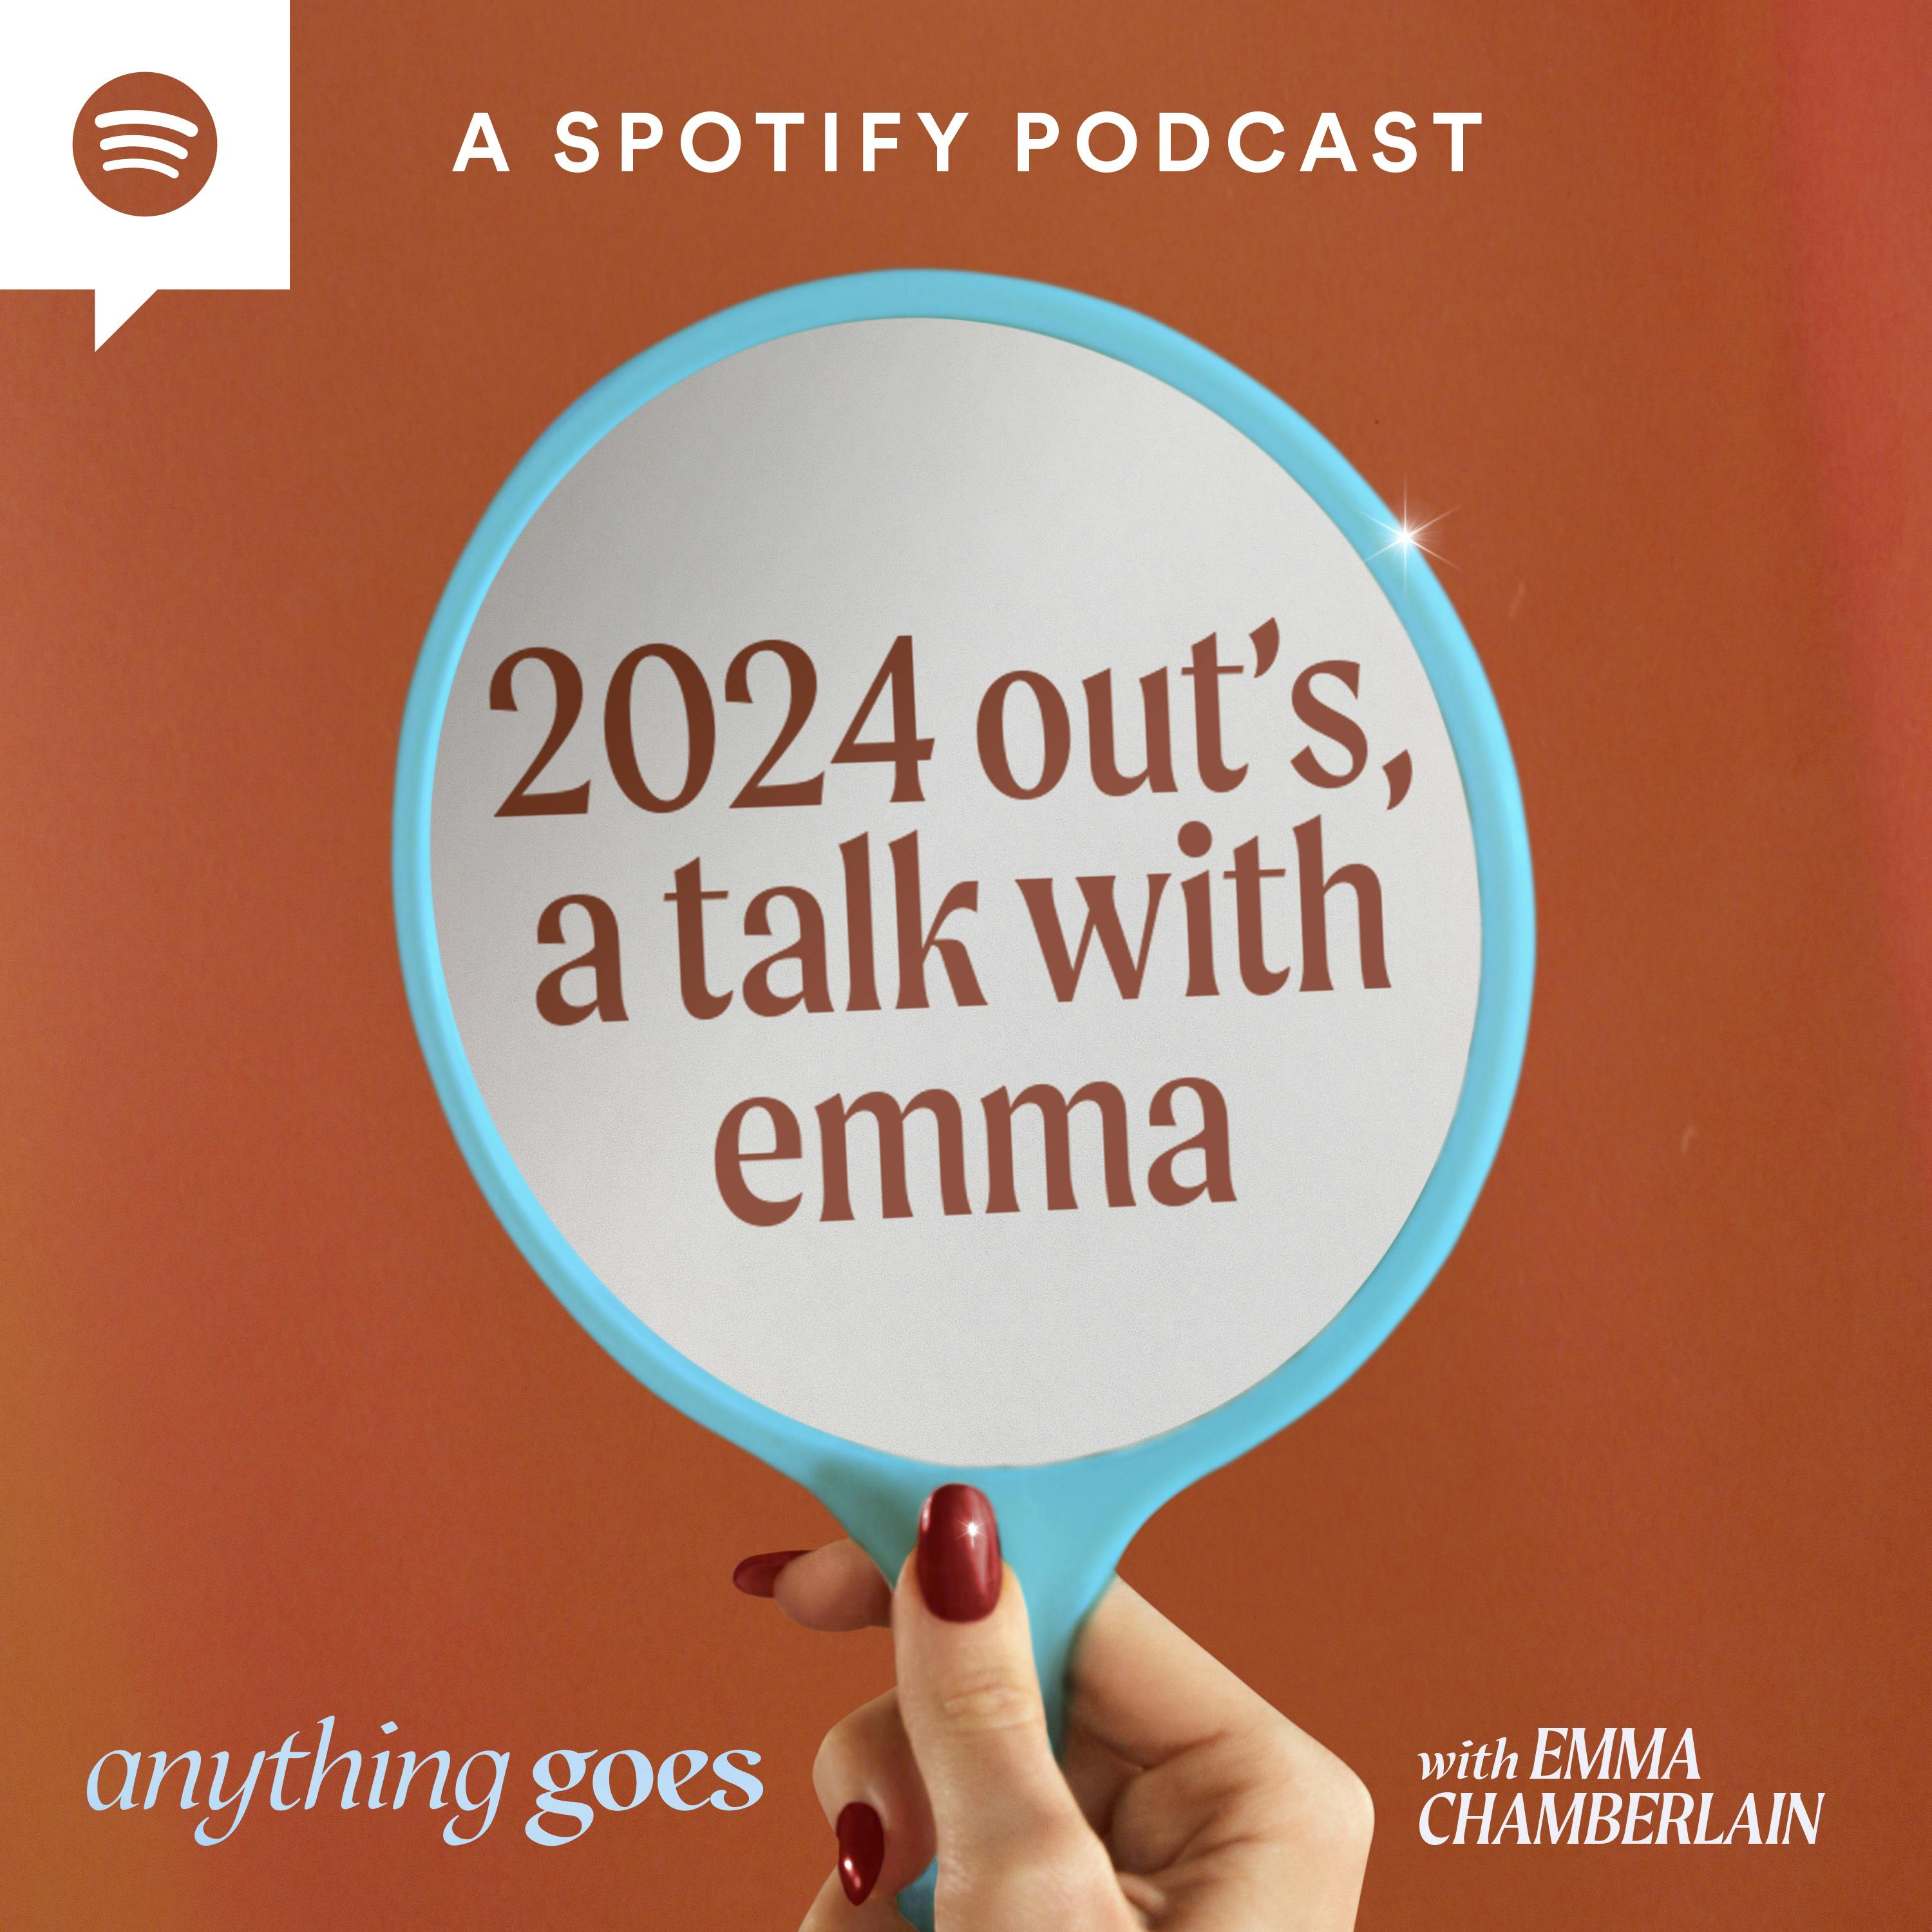 2024 out's, a talk with emma